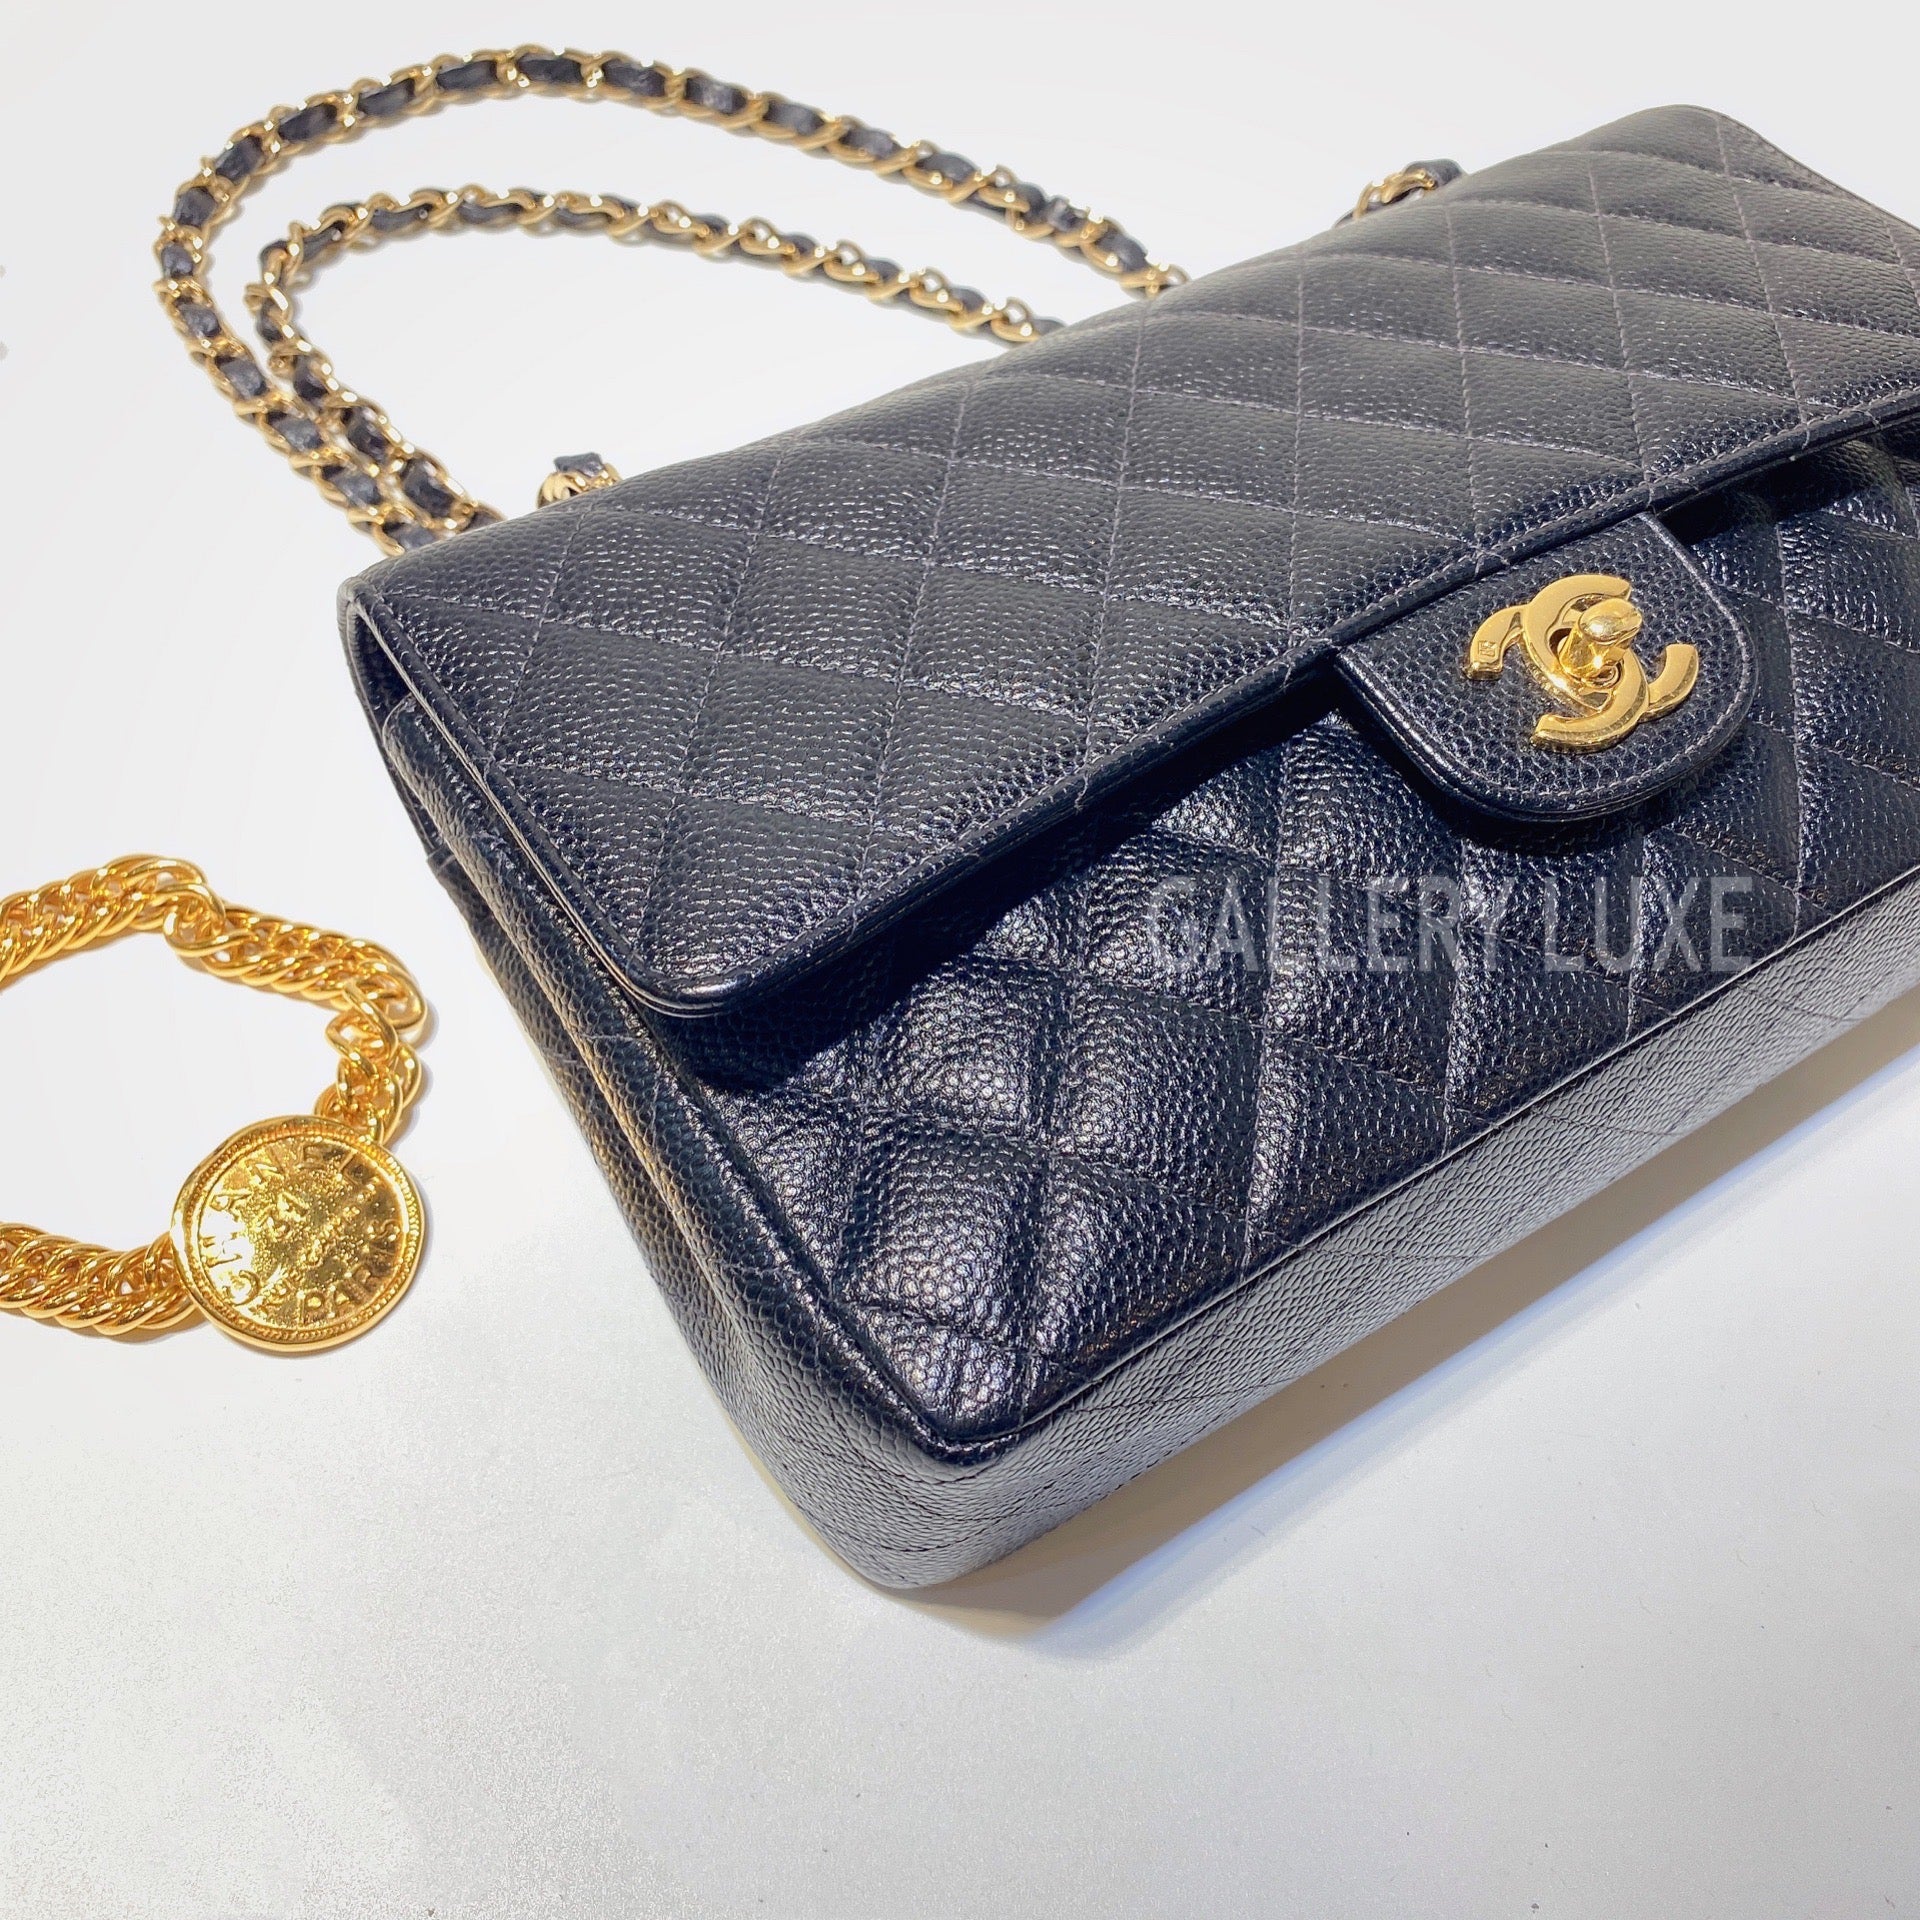 No.3107-Chanel Vintage Caviar Classic Flap 25cm – Gallery Luxe